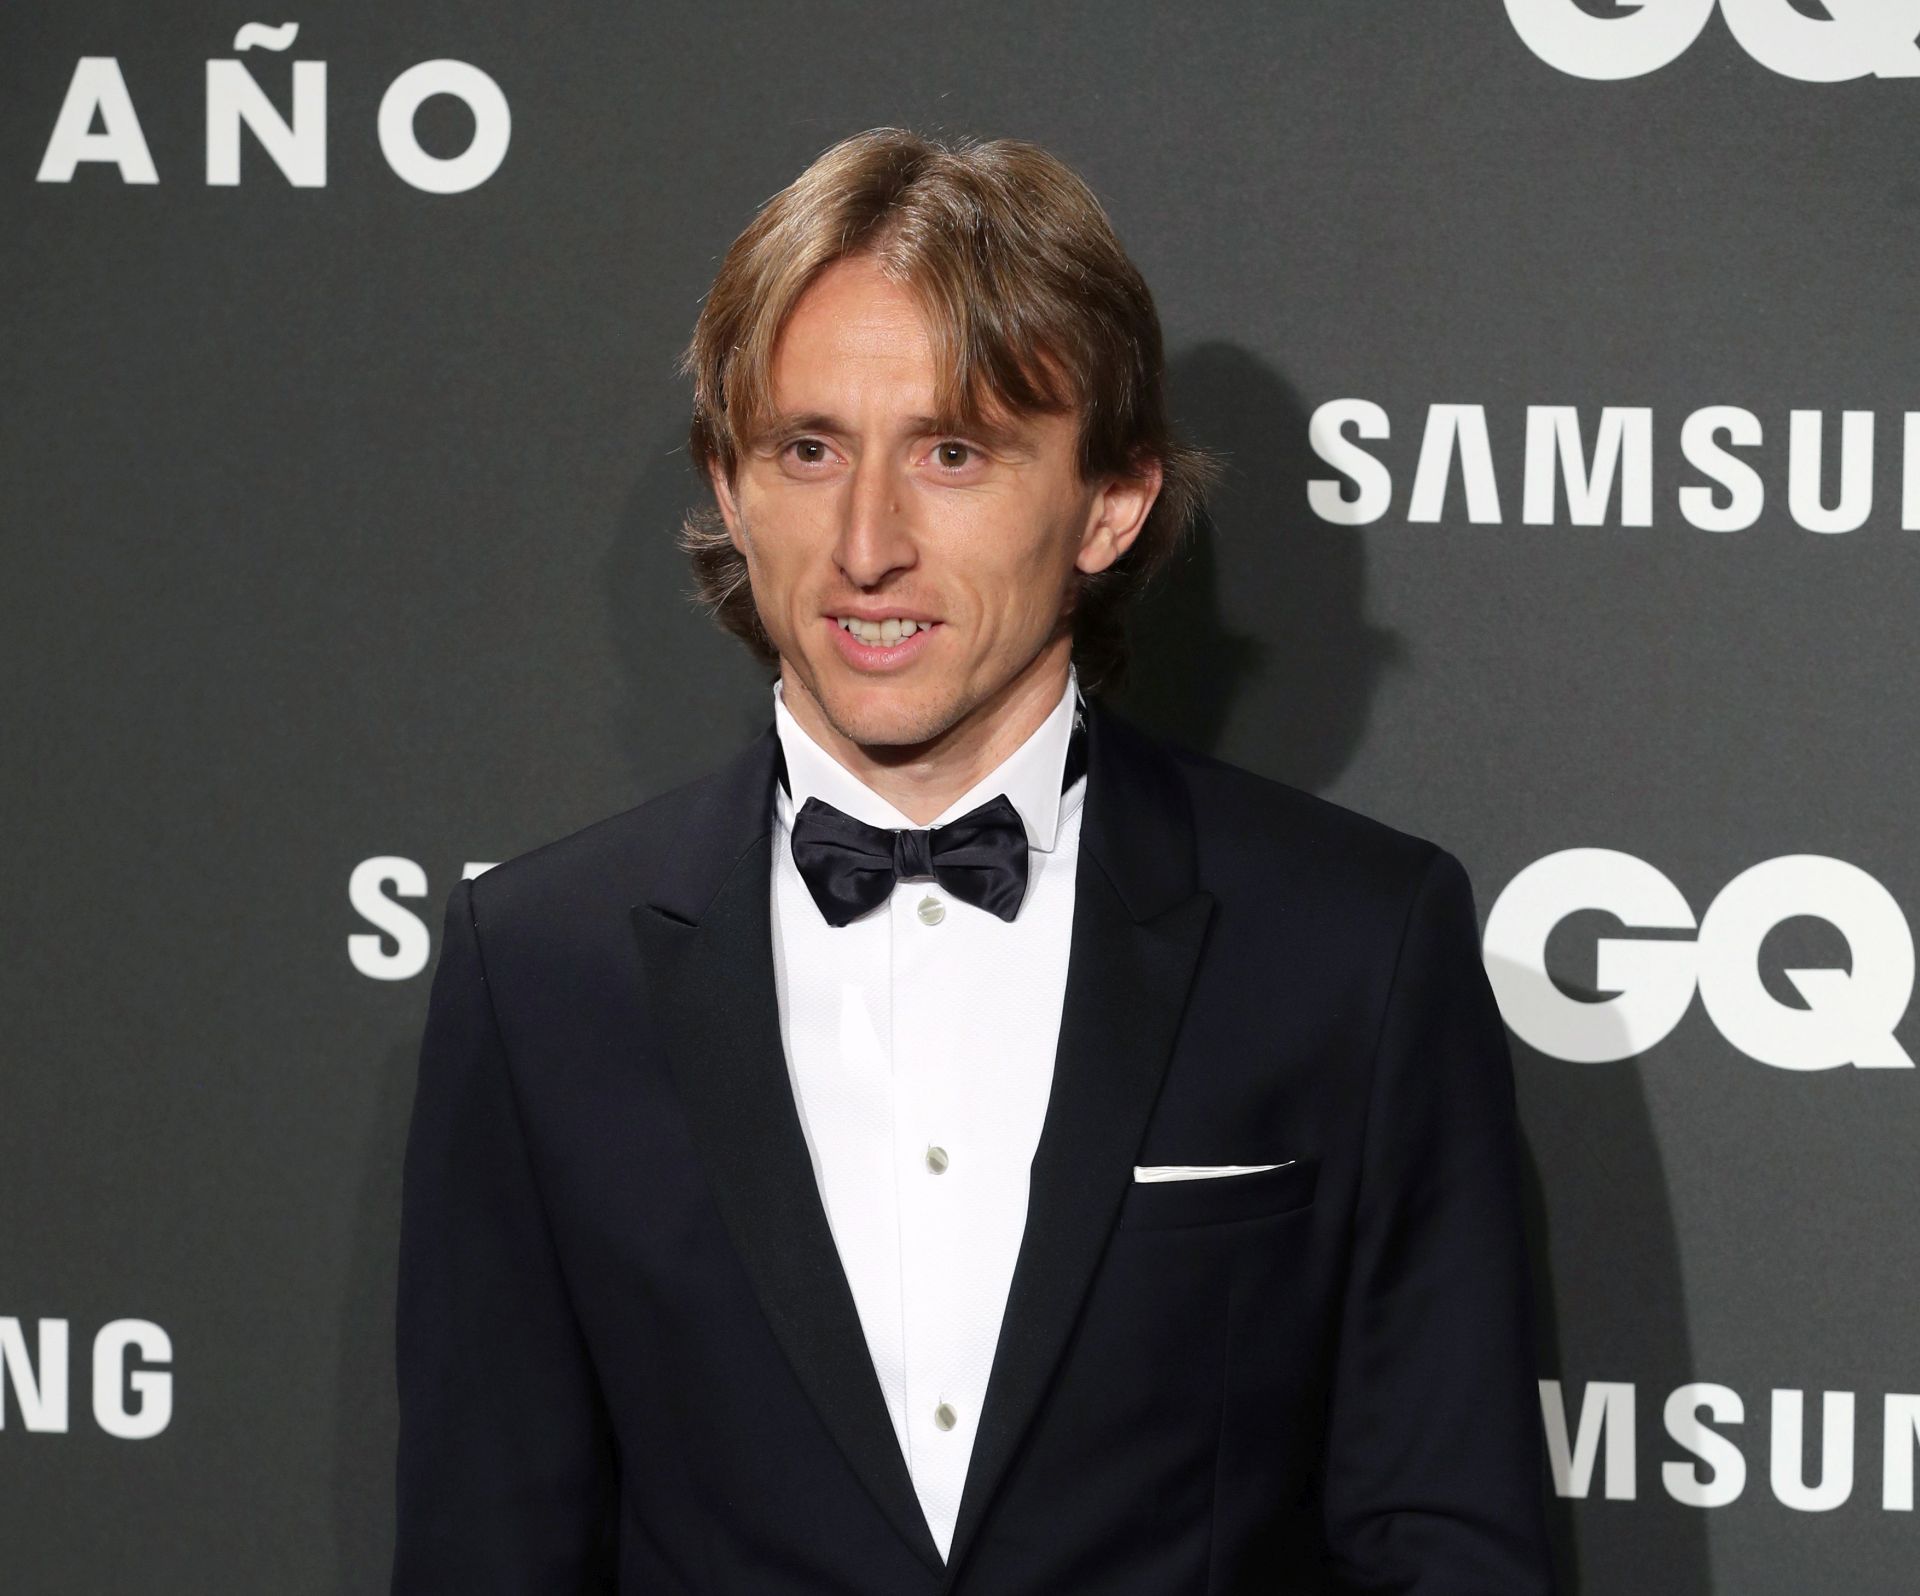 epa07183465 Real Madrid's Croatian soccer player Luka Modric poses for photographers upon arrival at the GQ Spanish Men of the Year Awards 2018 gala held in Madrid, Spain, 22 November 2018. The awards are presented by international monthly men's magazine GQ.  EPA/Ballesteros